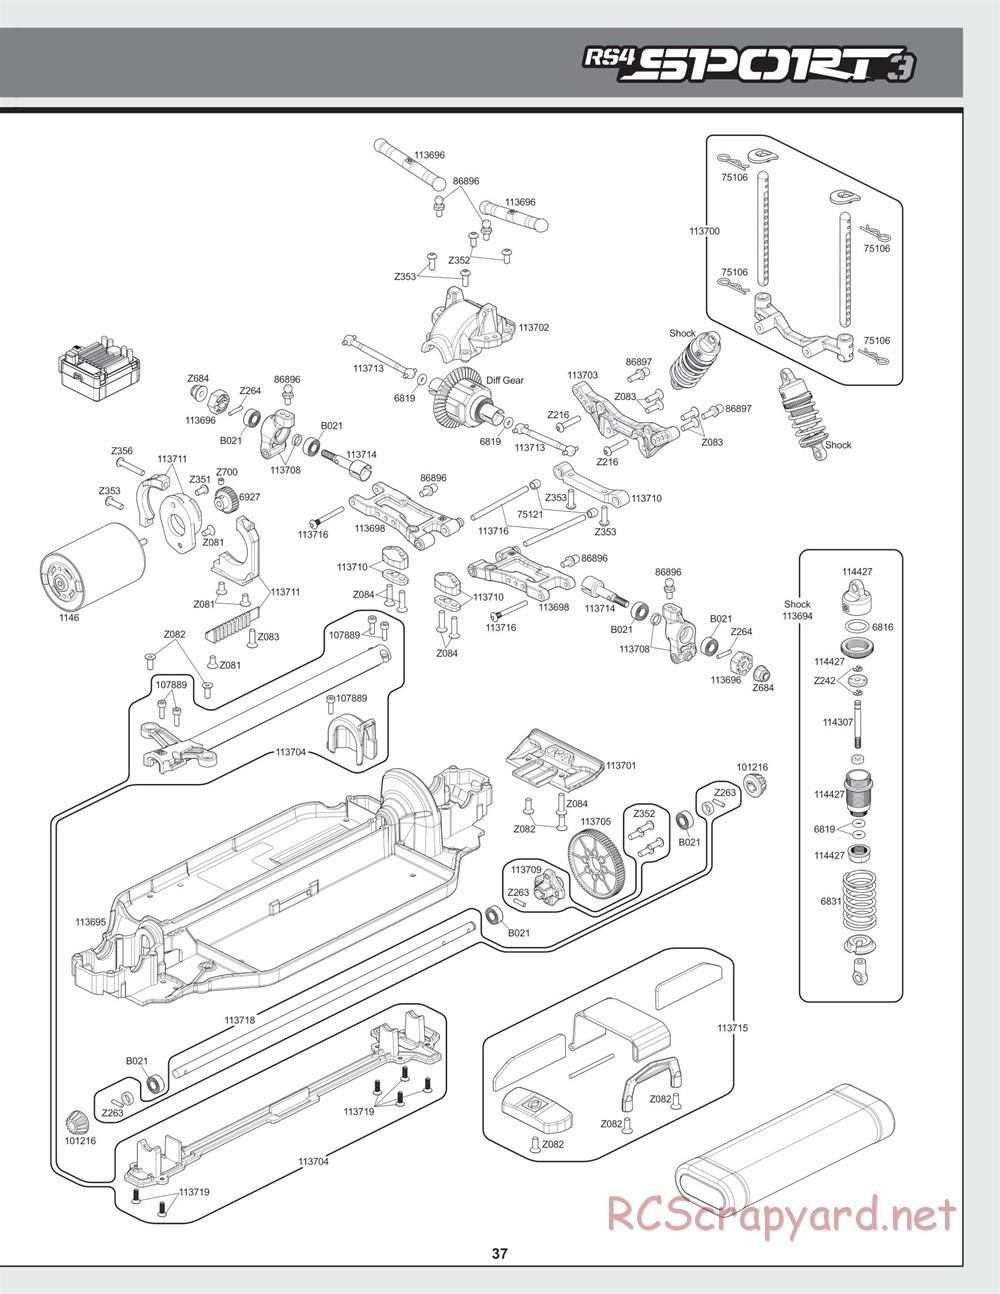 HPI - RS4 Sport 3 - Exploded View - Page 37